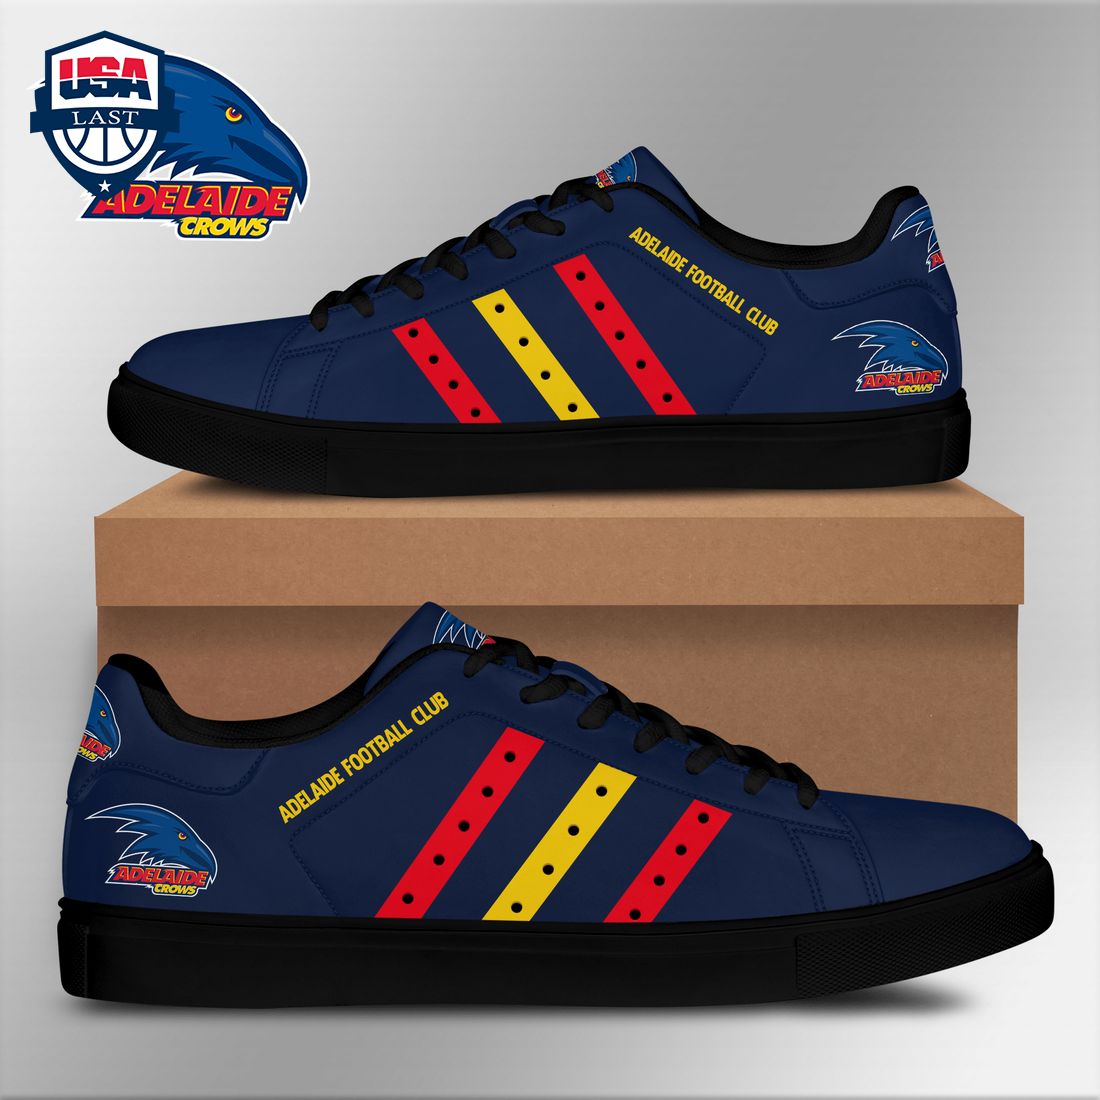 adelaide-football-club-red-yellow-stripes-stan-smith-low-top-shoes-1-SQ7hW.jpg